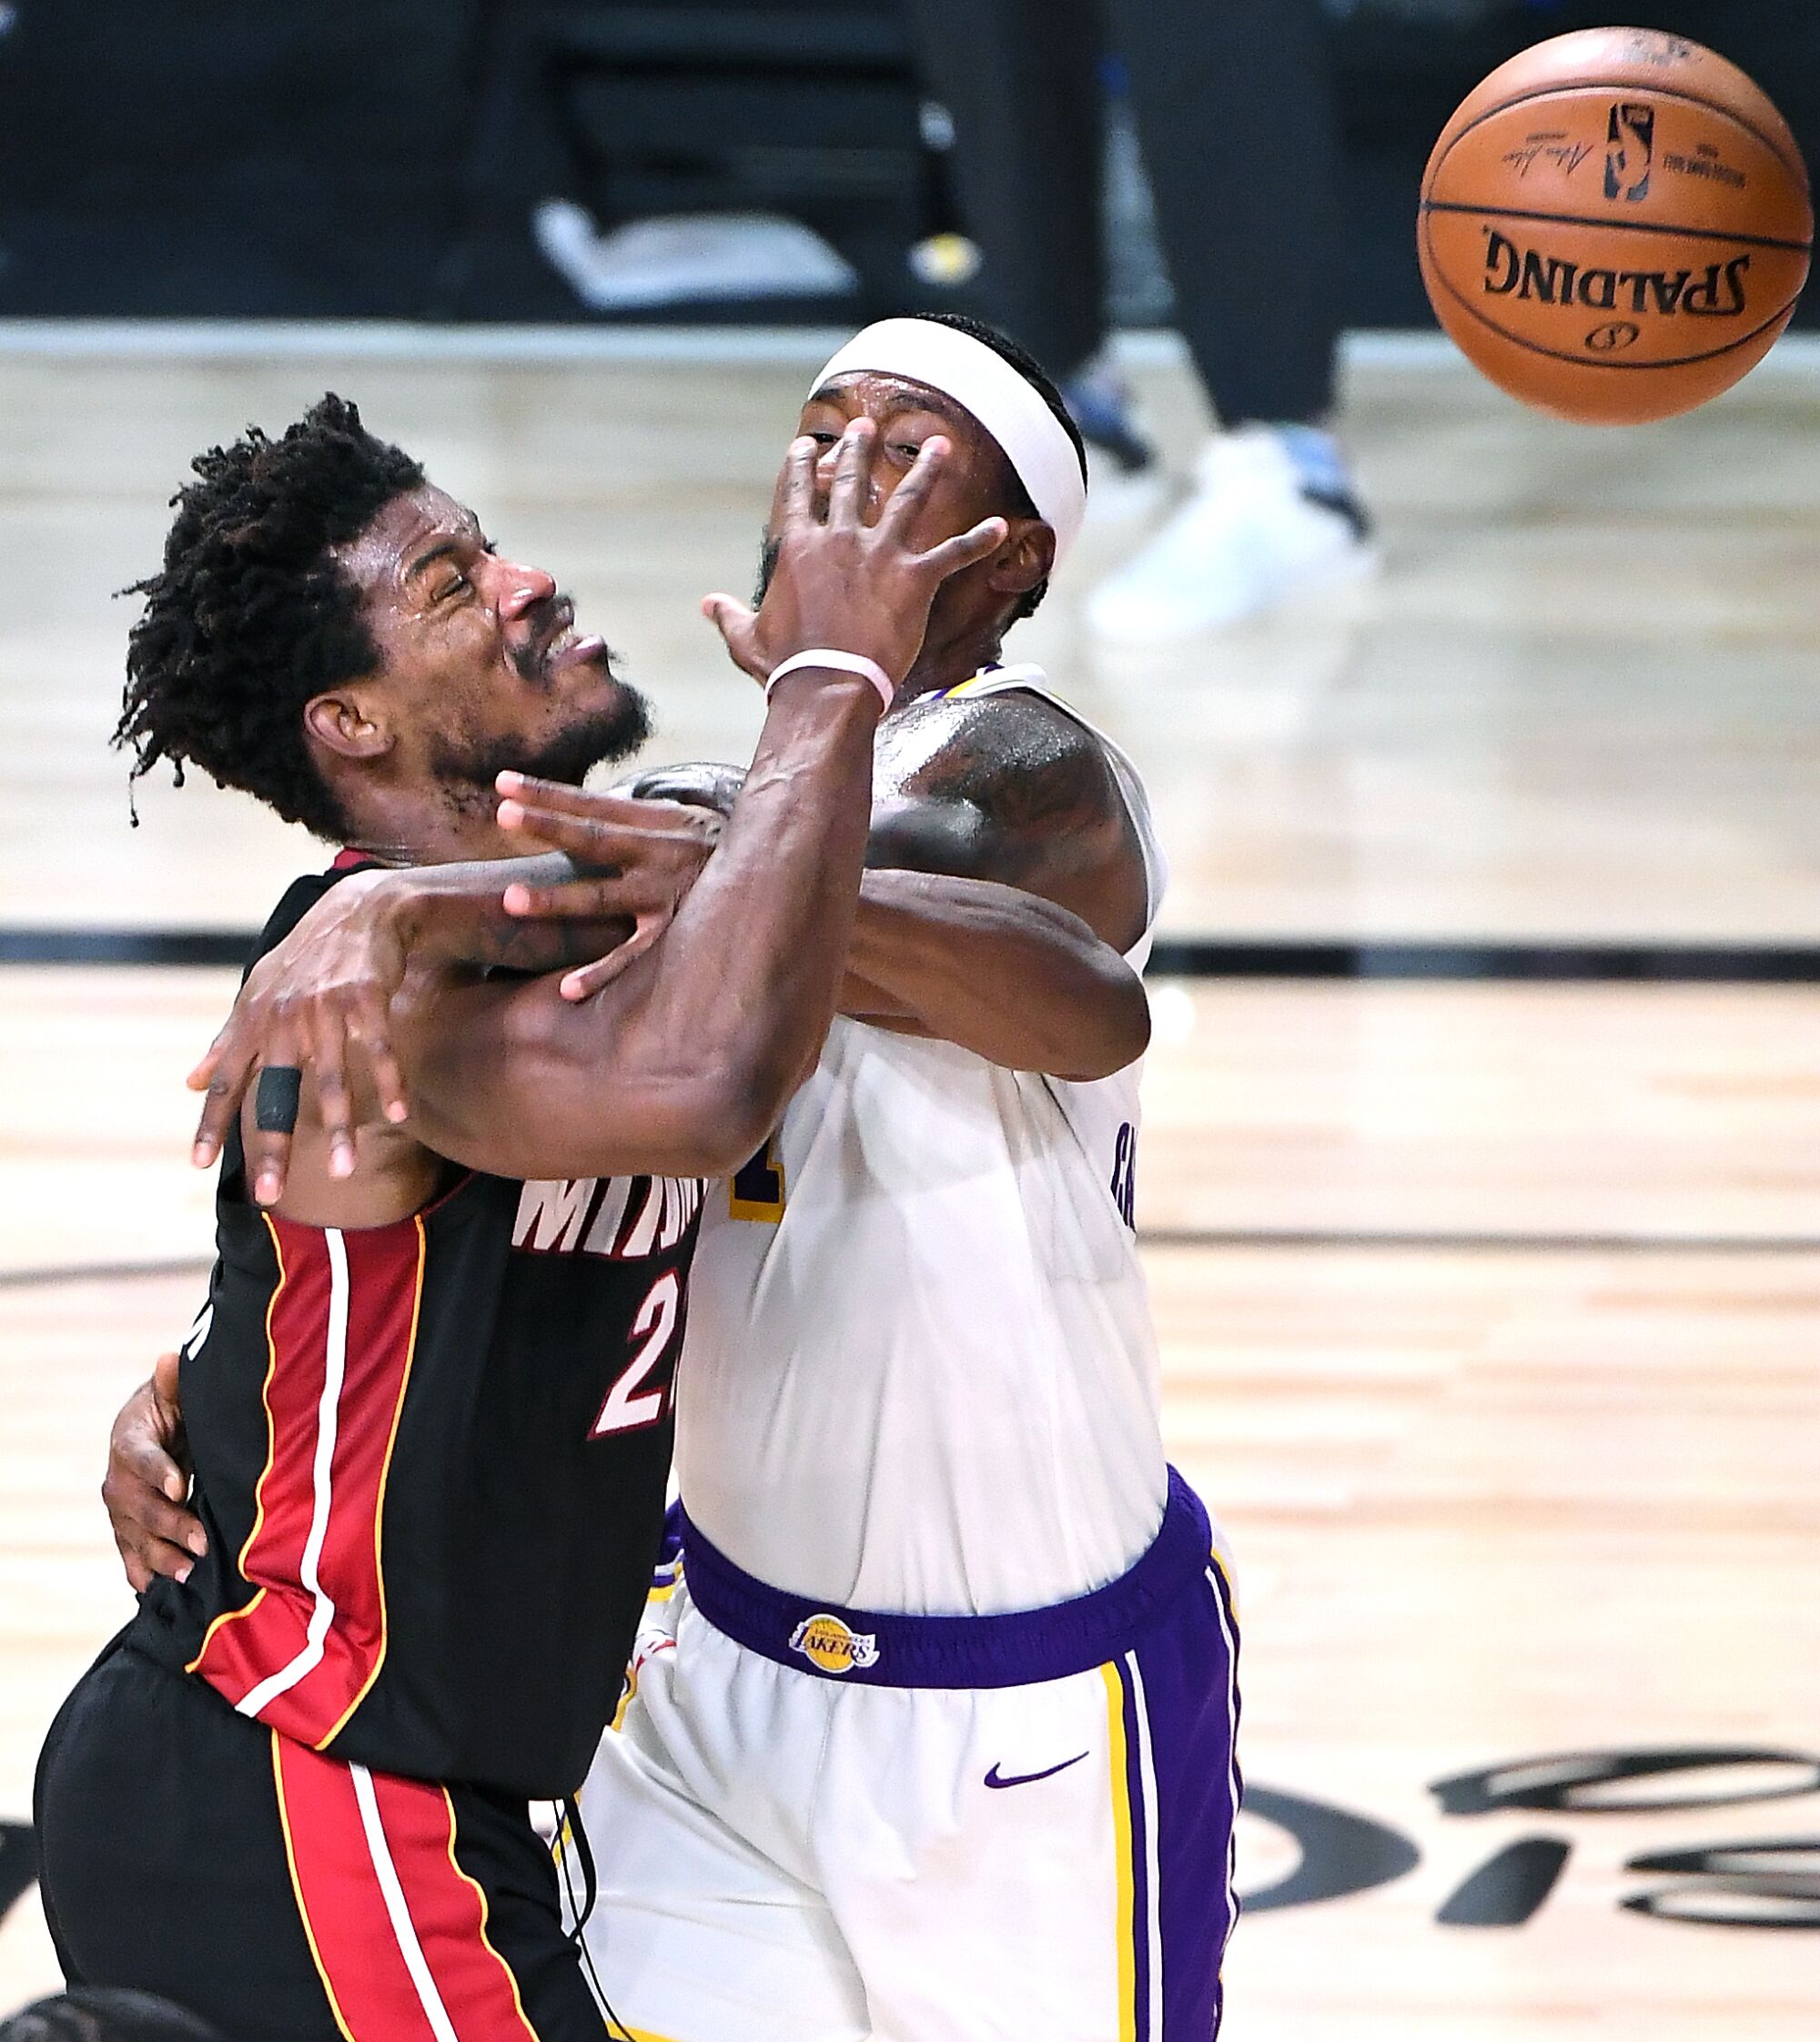 Lakers guard Kentavious Caldwell-Pope fouls Miami's Jimmy Butler as he drives to the basket in the fourth quarter of Game 3.